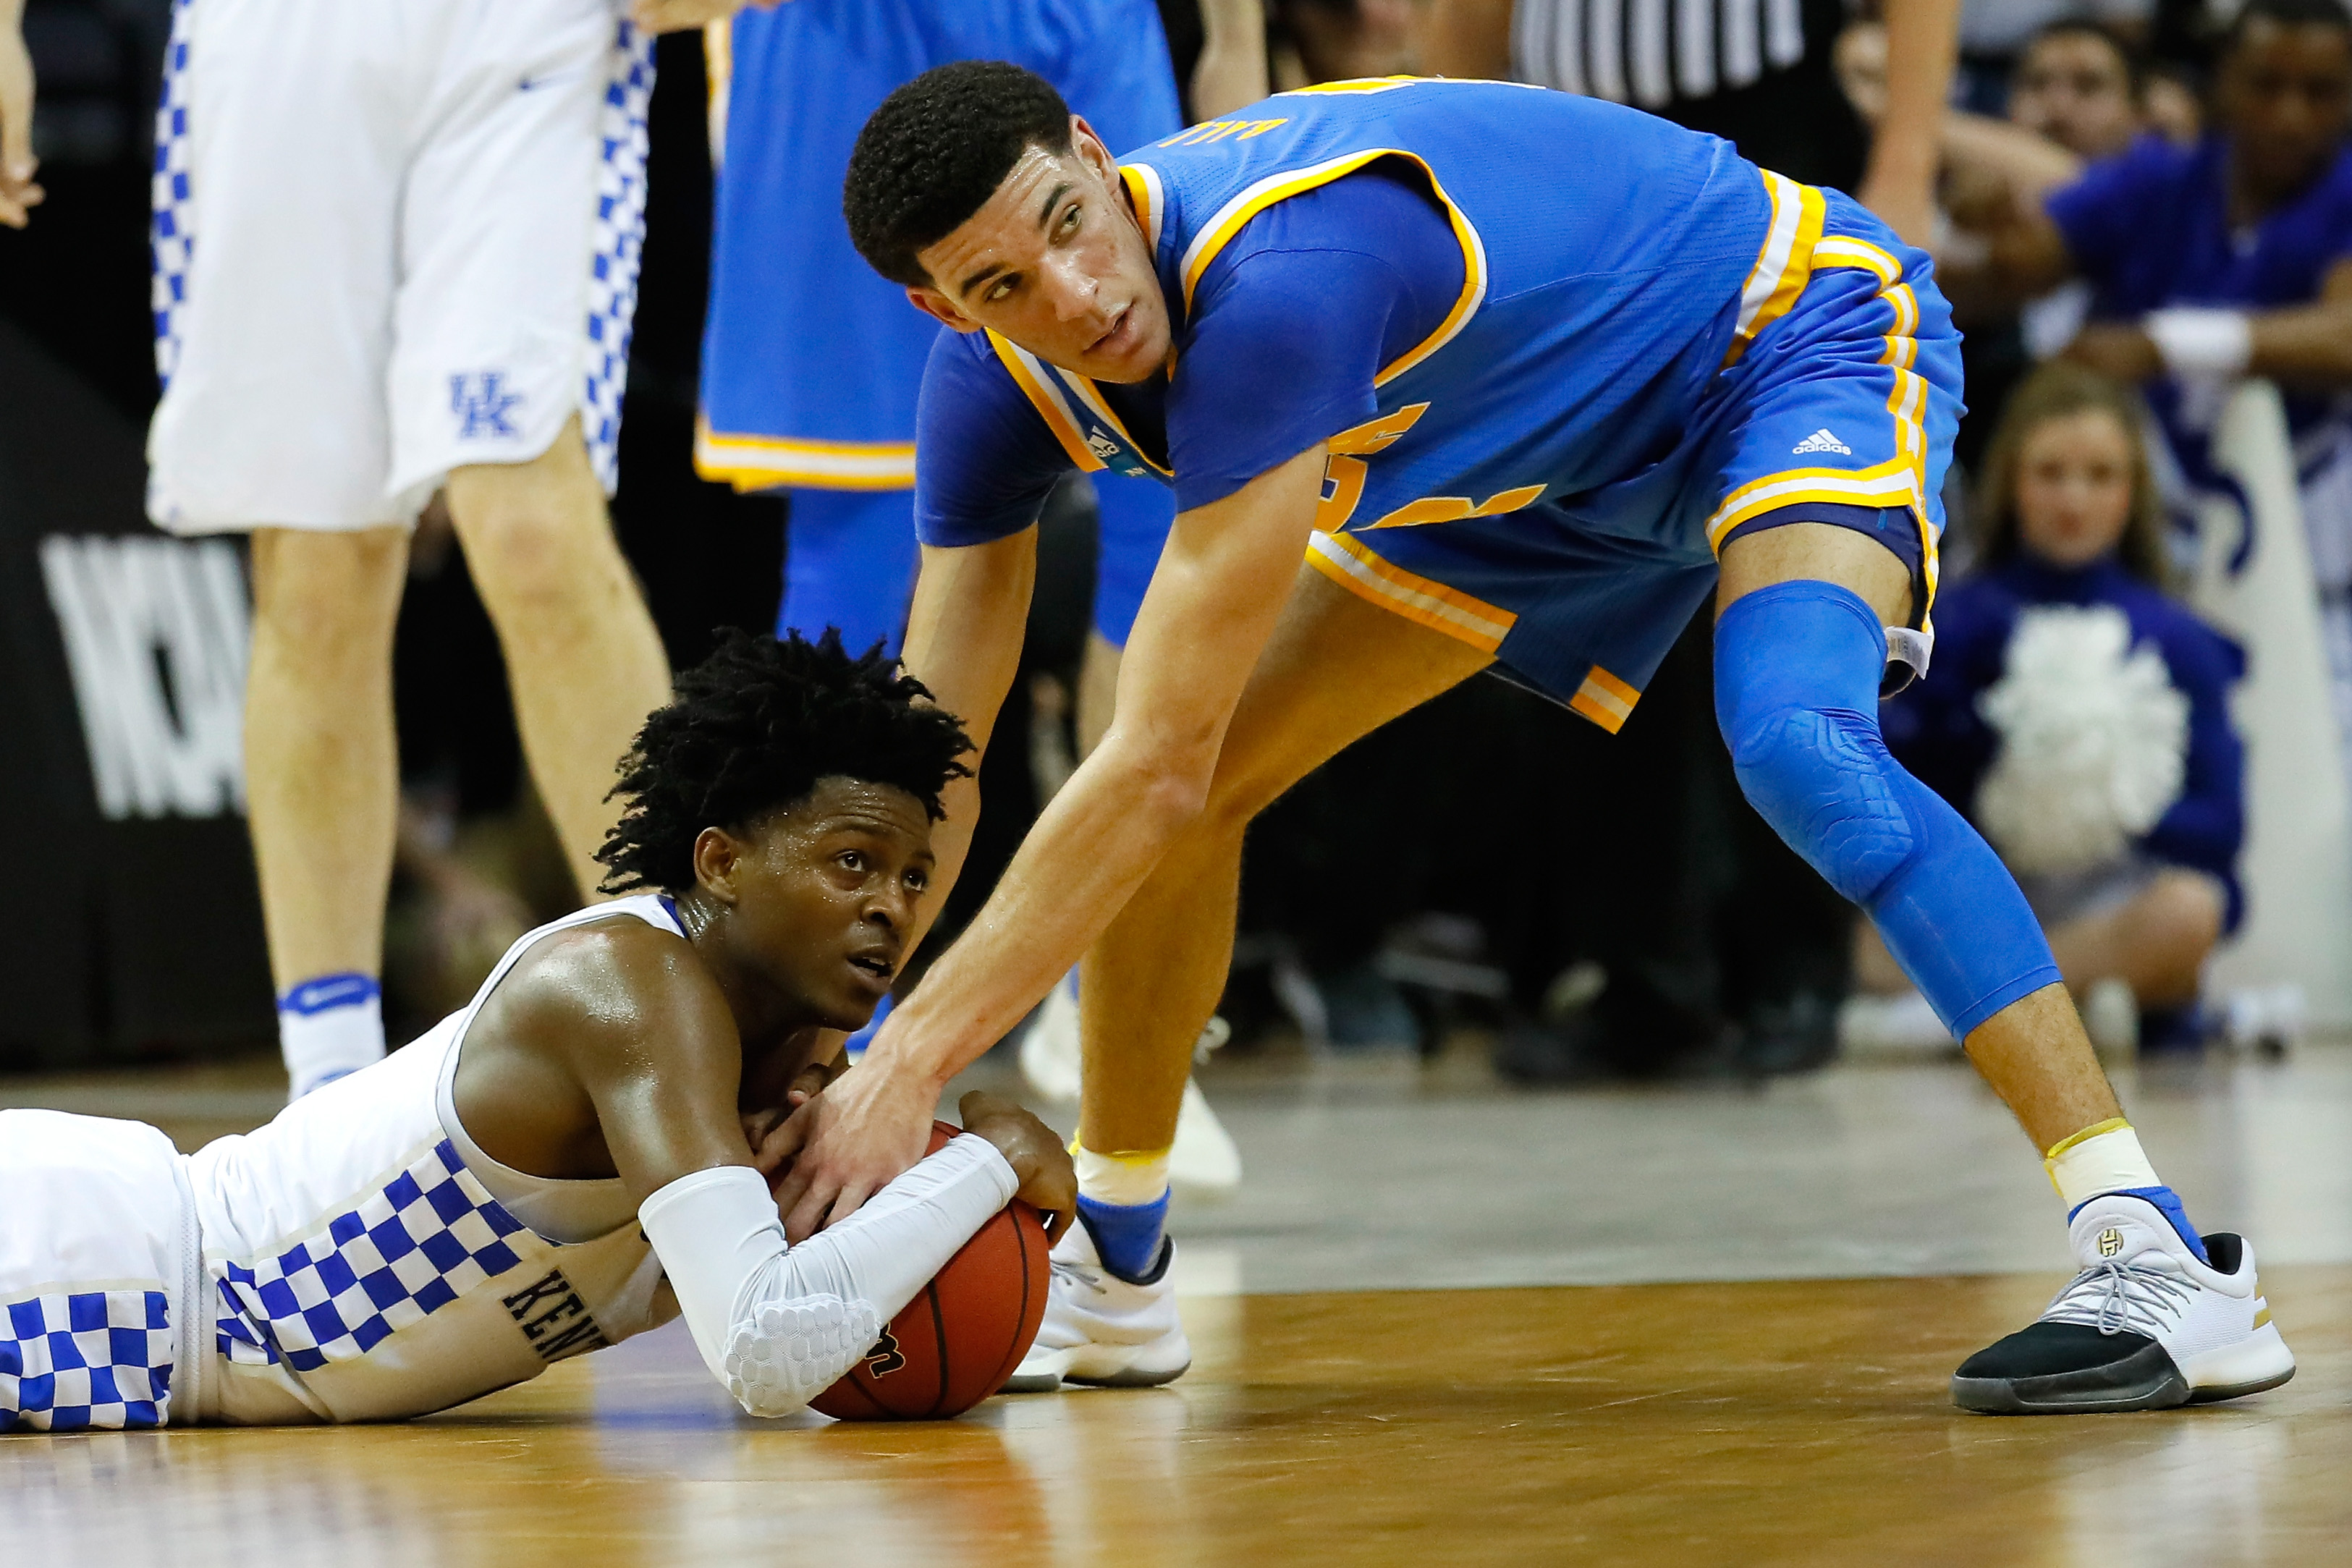 MEMPHIS, TN - MARCH 24: De'Aaron Fox #0 of the Kentucky Wildcats and Lonzo Ball #2 of the UCLA Bruins compete for a lose ball in the second half during the 2017 NCAA Men's Basketball Tournament South Regional at FedExForum on March 24, 2017 in Memphis, Tennessee. (Photo by Kevin C. Cox/Getty Images)